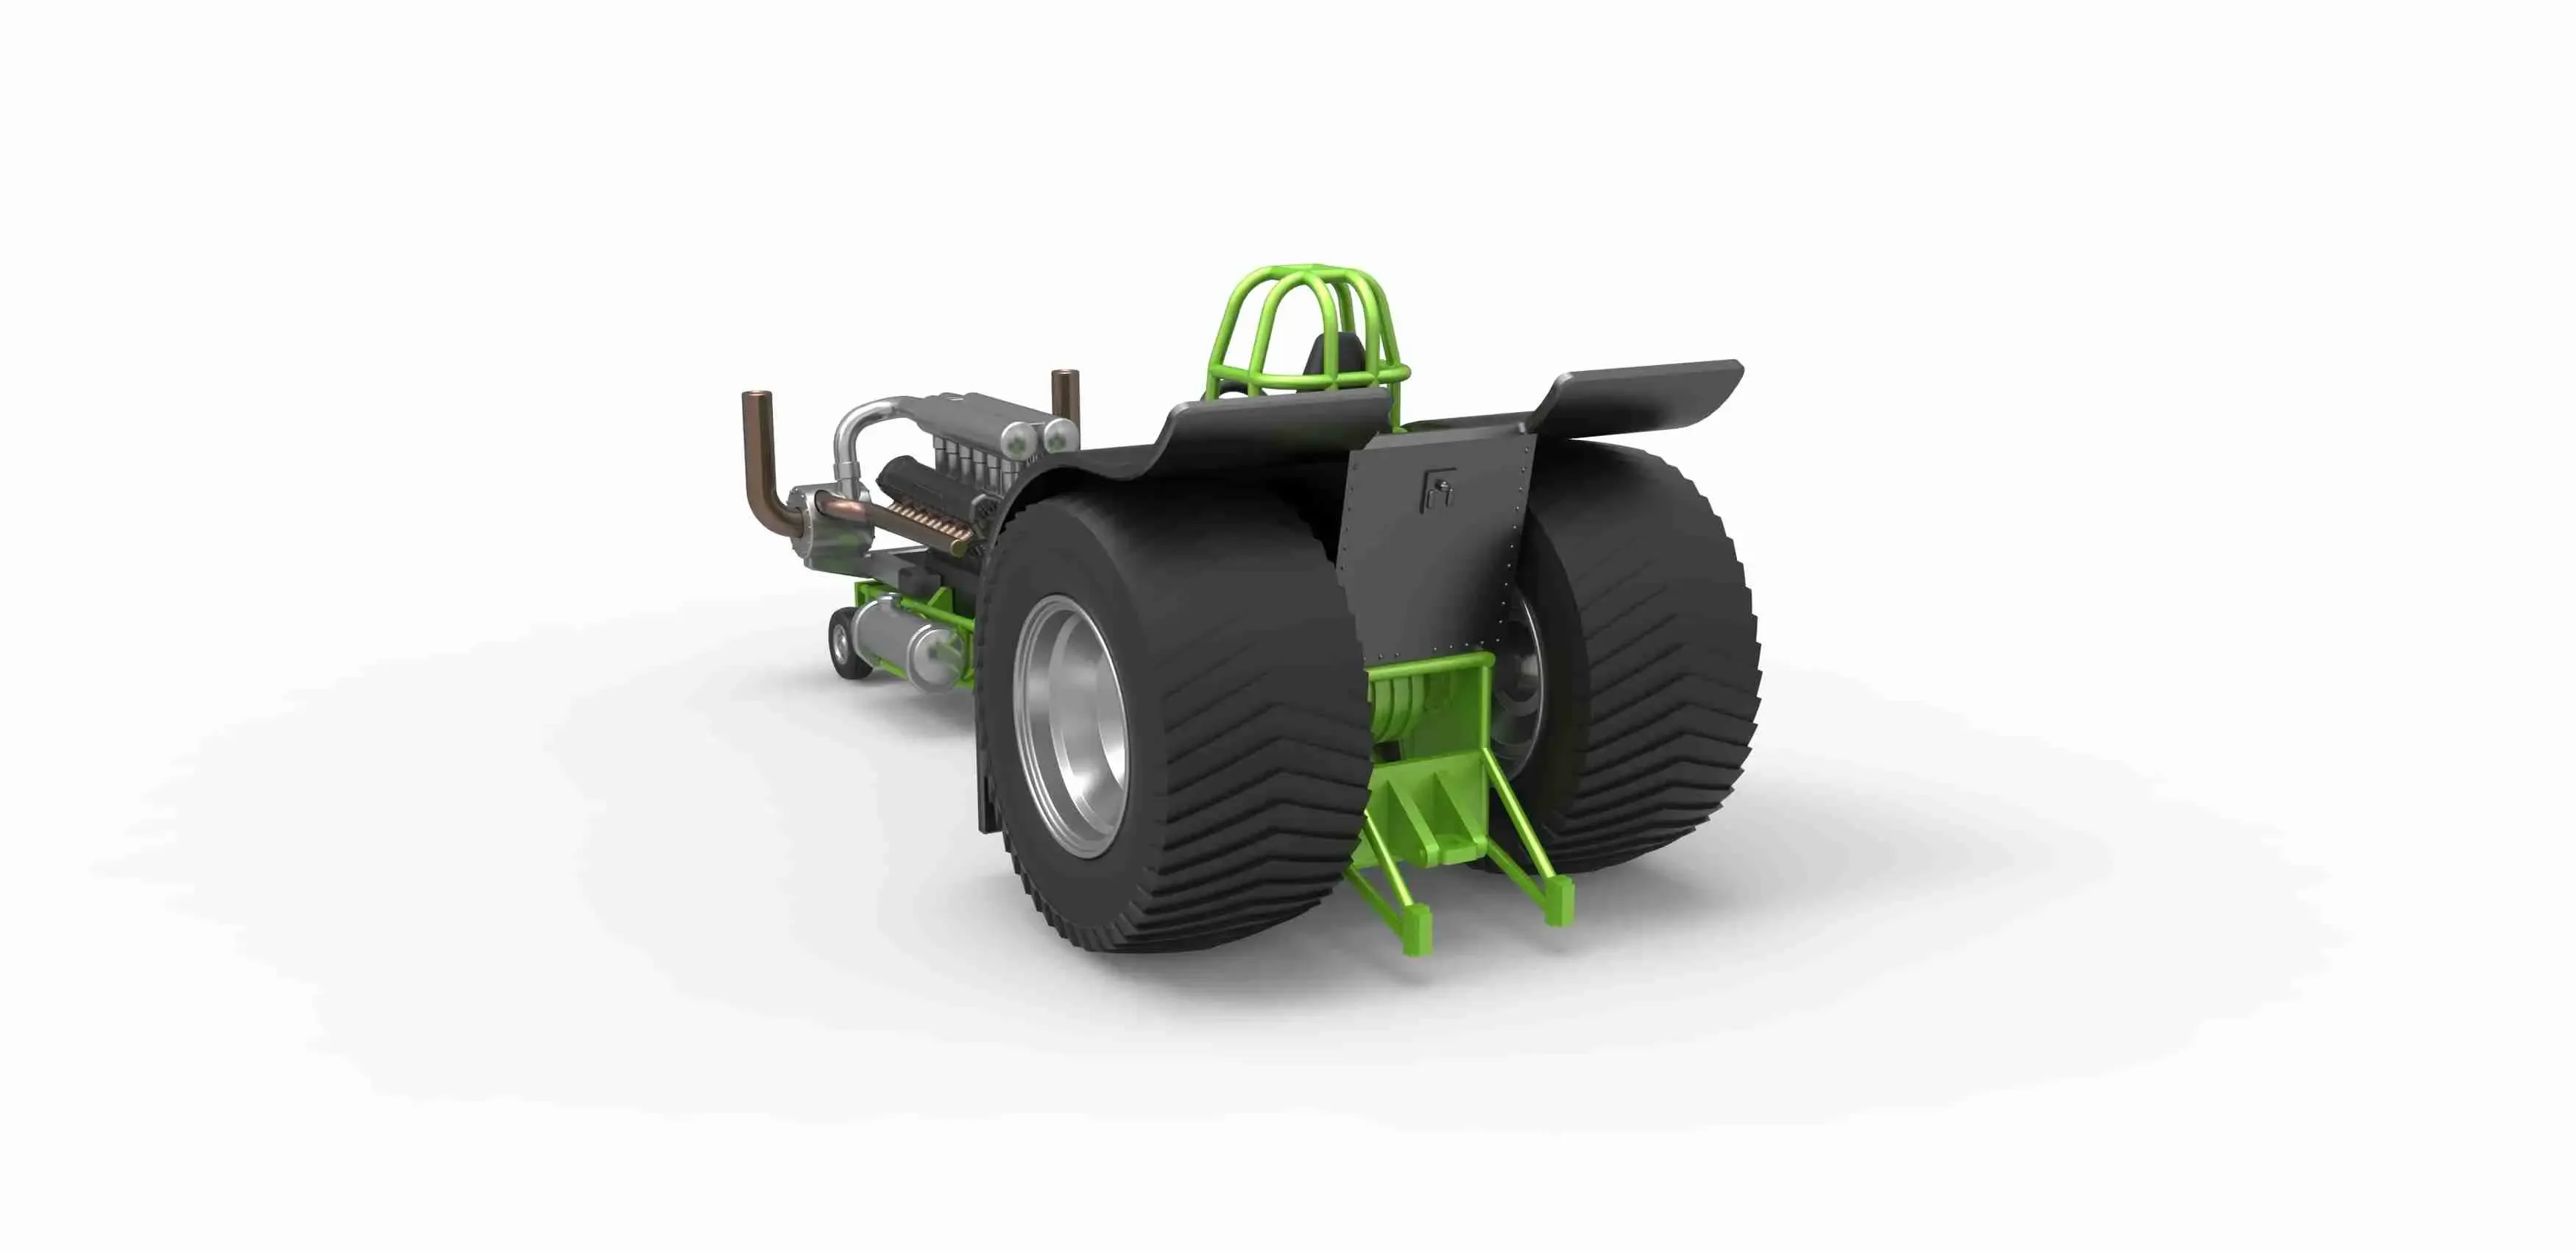 Pulling tractor with turbo engine V12 Version 1 Scale 1:25